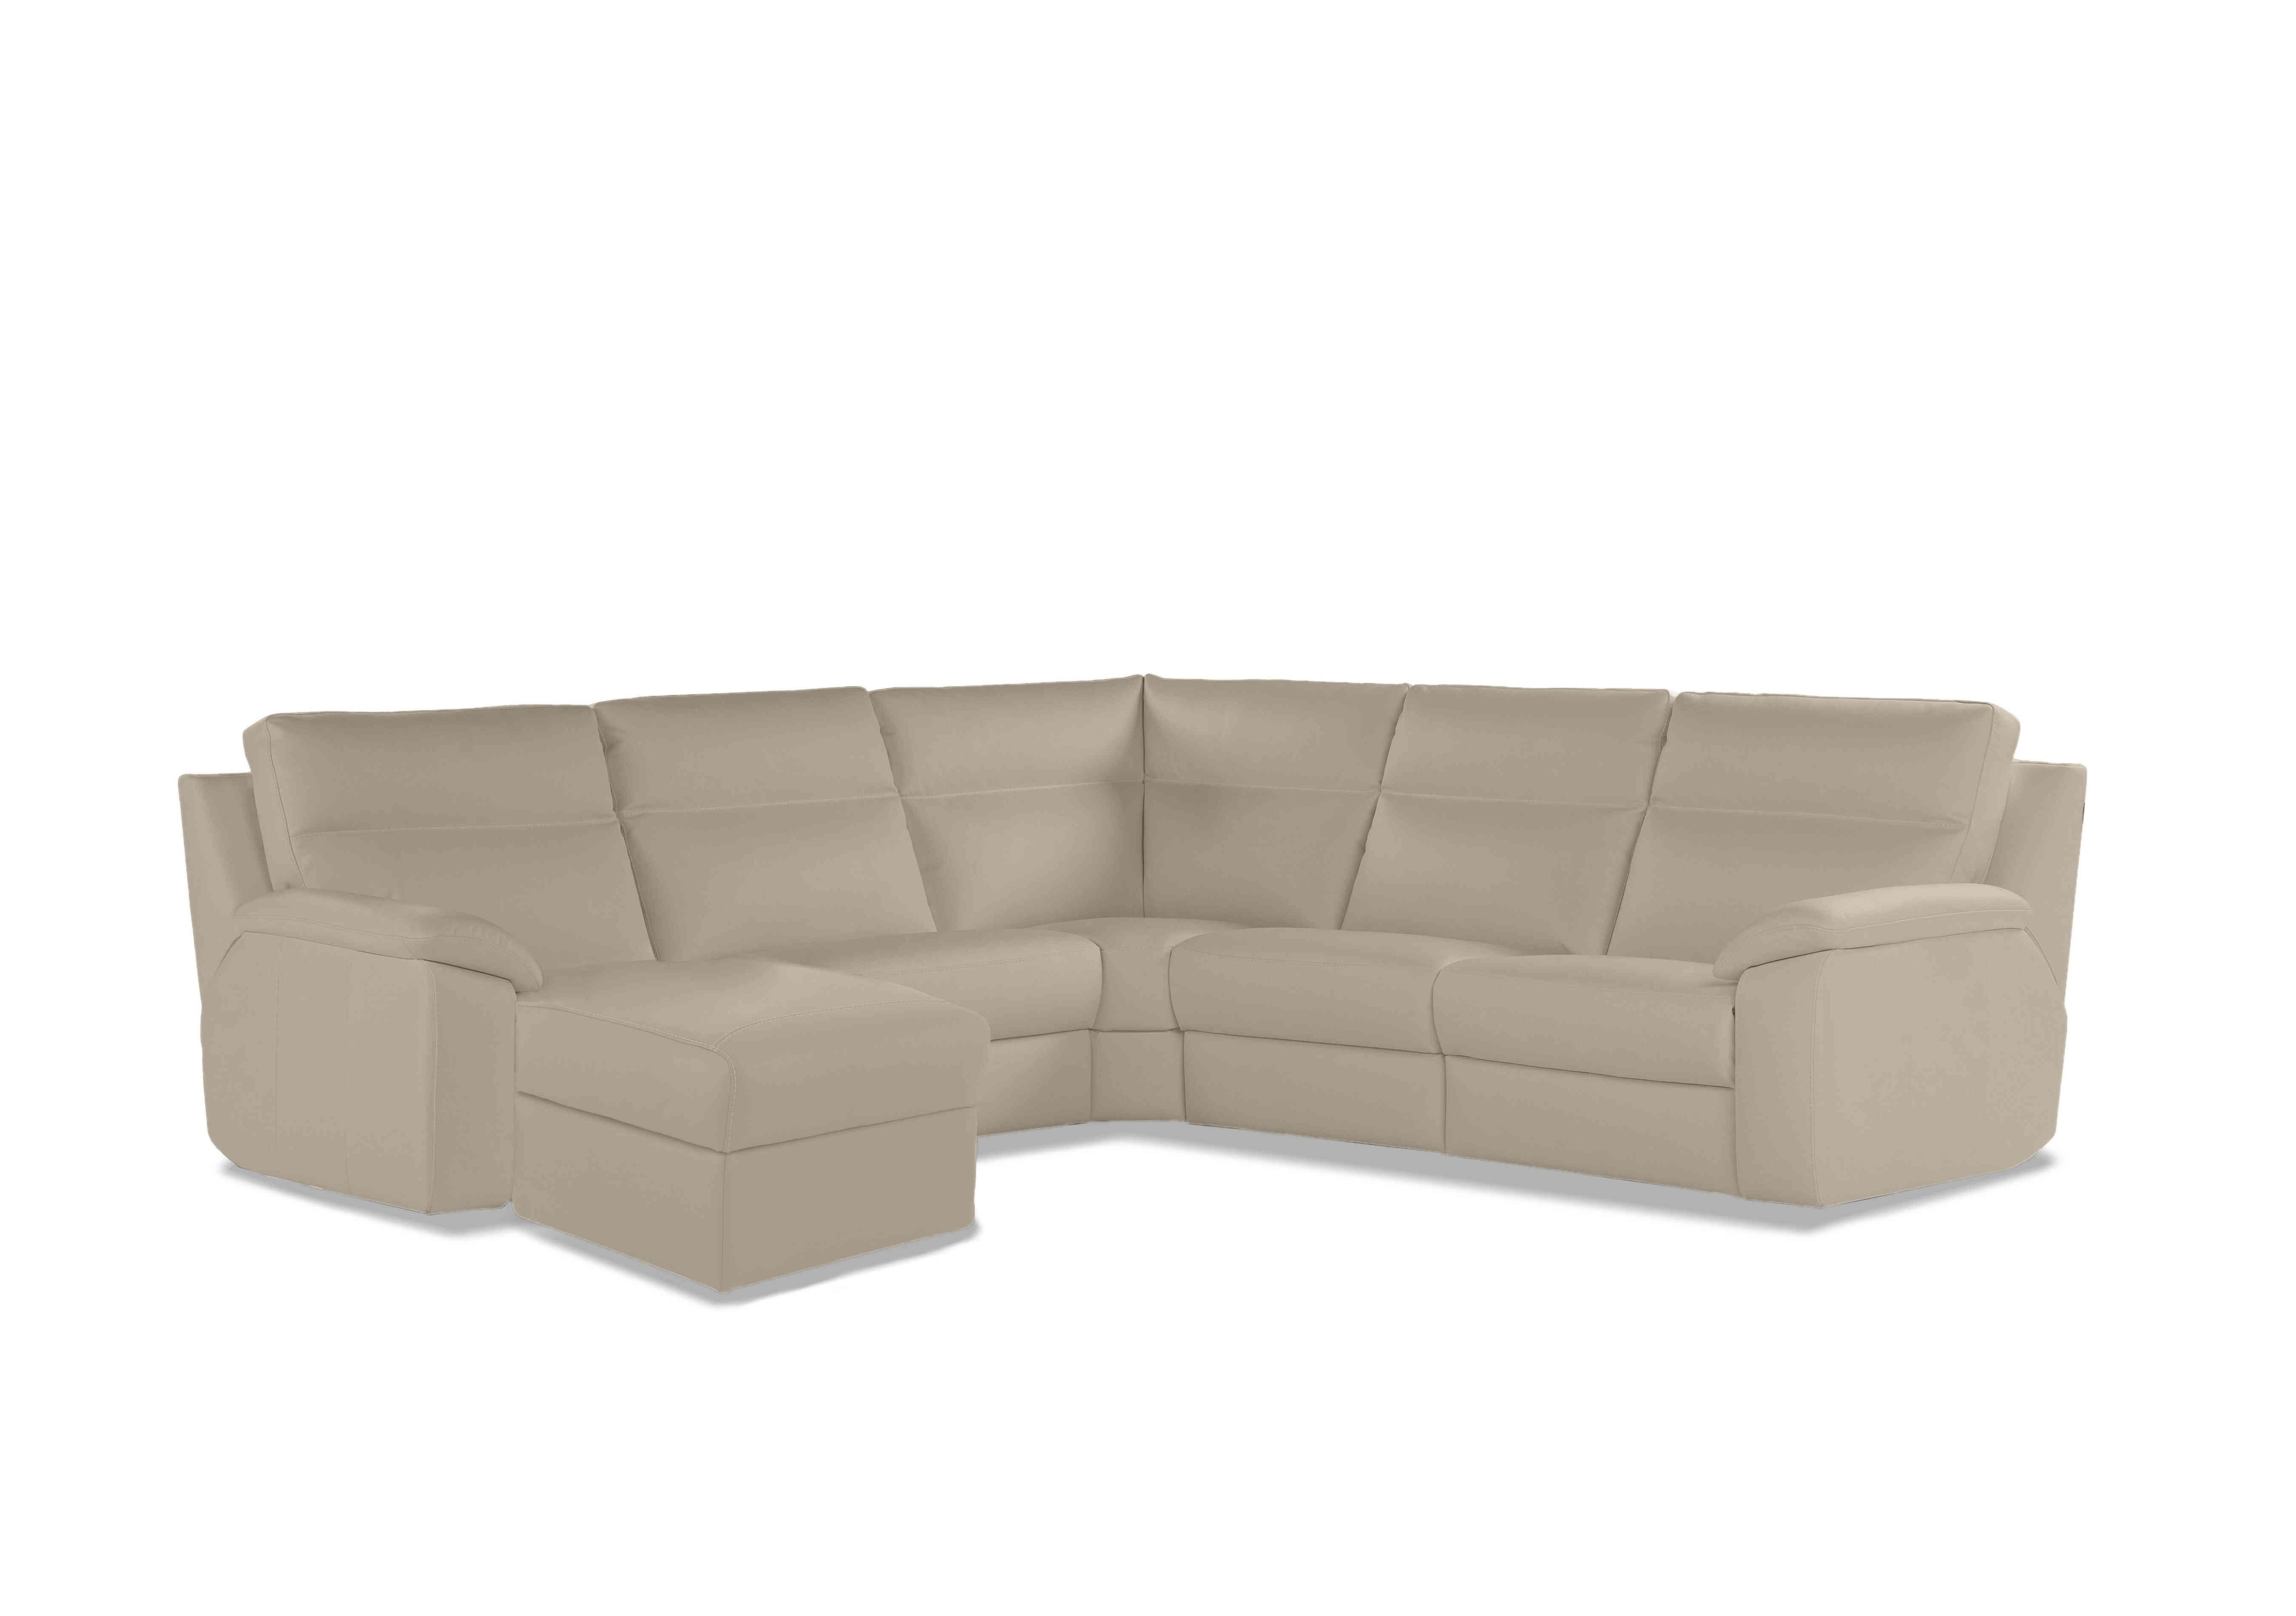 Pepino Large Leather Corner Sofa with Chaise End in 352 Torello Fango on Furniture Village